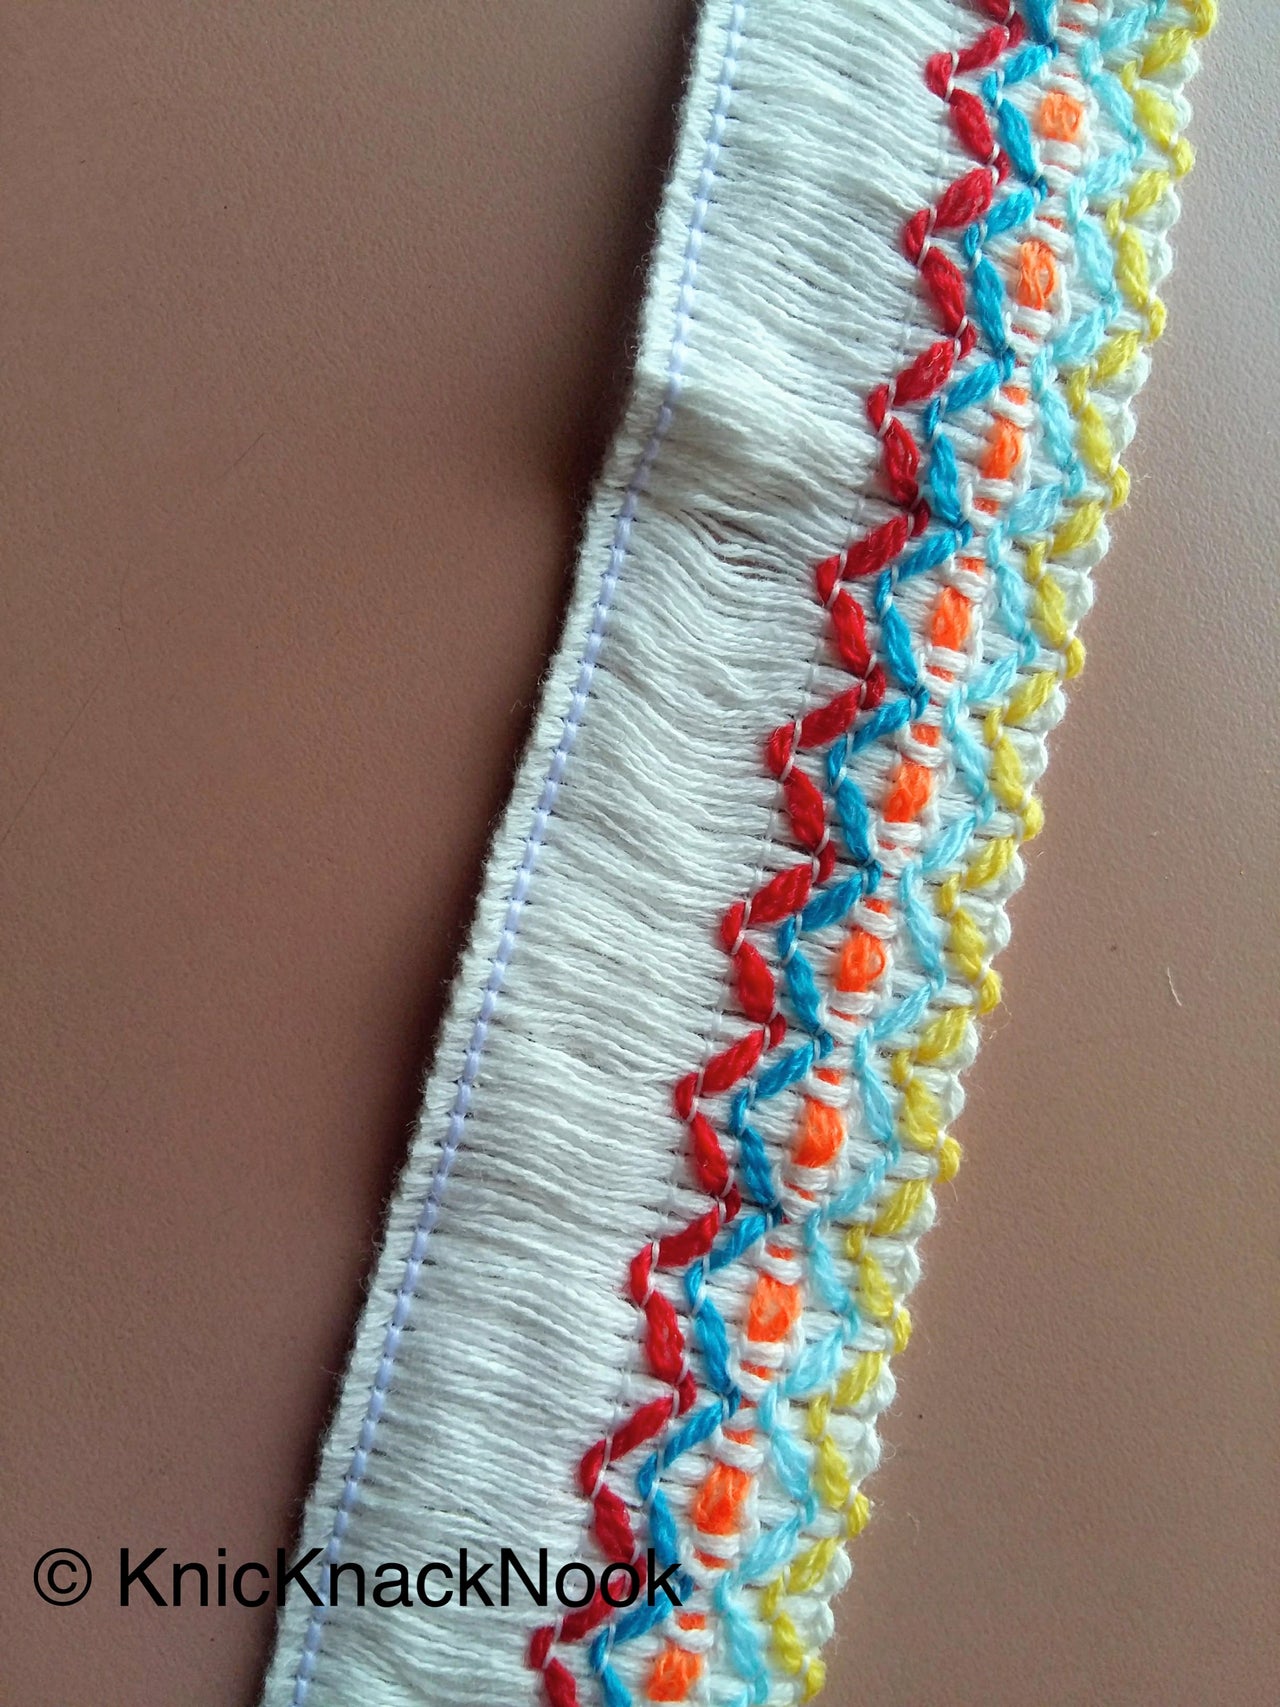 White / Black Threaded Trim With Red, Blue, Yellow And Orange Embroidery, Approx. 38mm Wide - 200317L100/01Trim